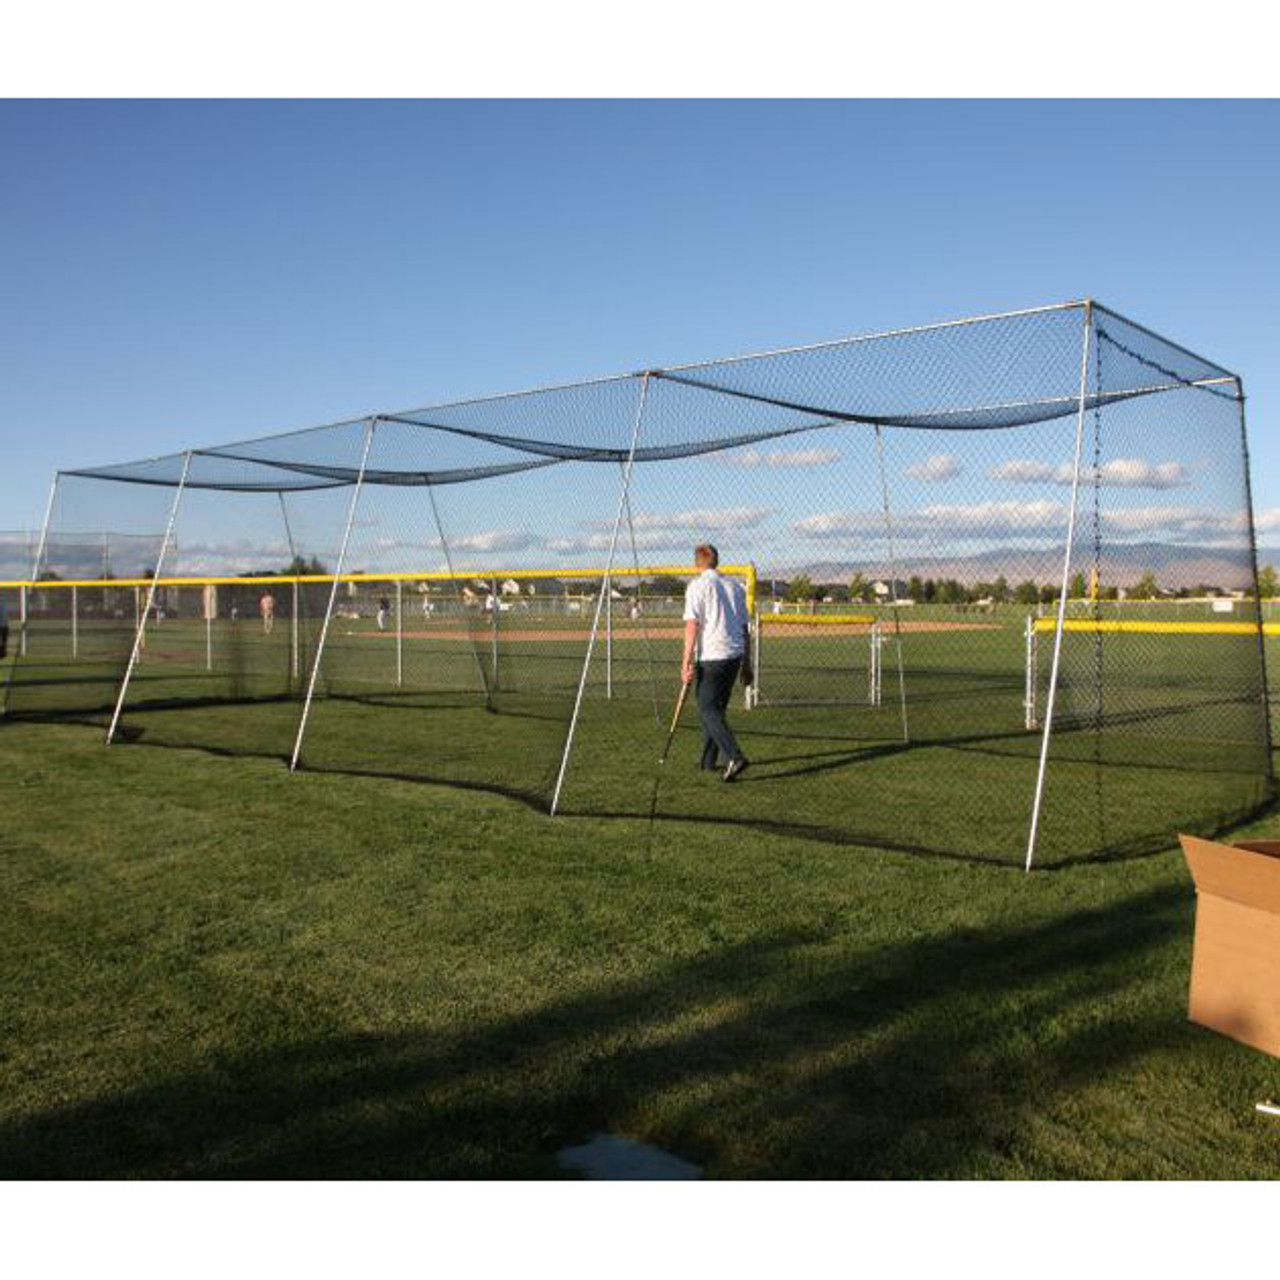 Portable 50ft. Batting Cage with #21 Net by Wheelhouse